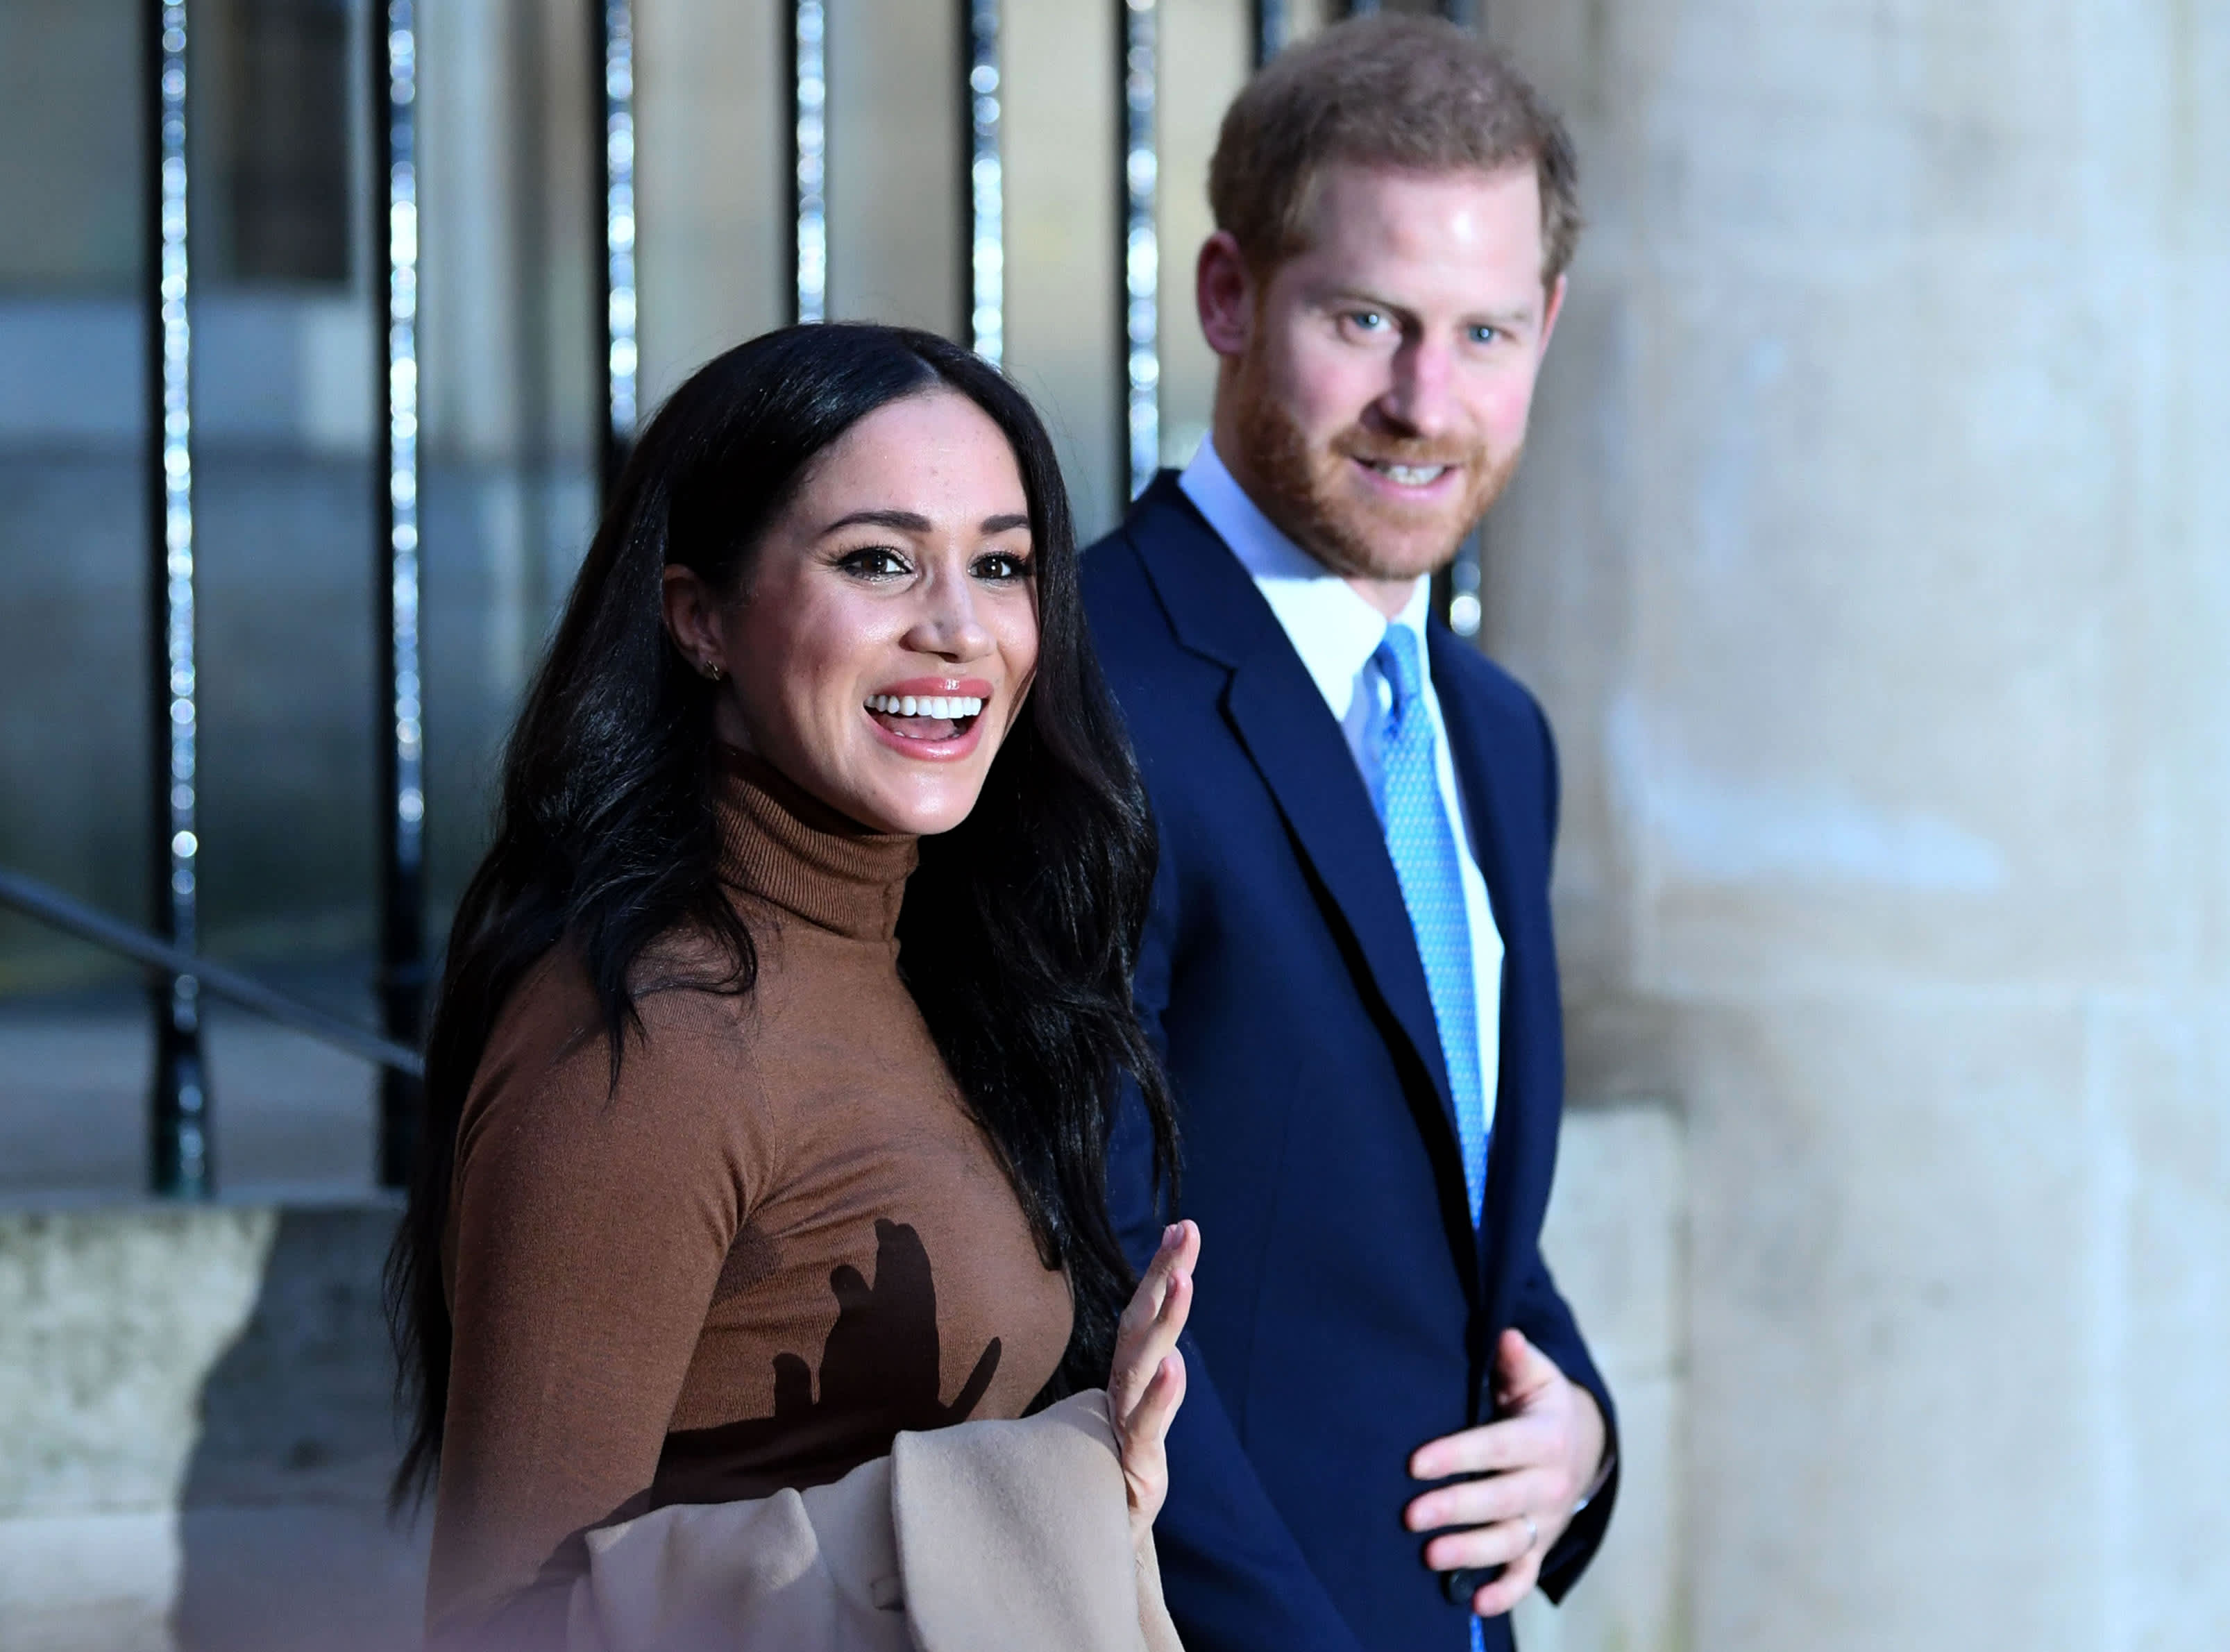 Here's a breakdown of Prince Harry and Meghan Markle's current income